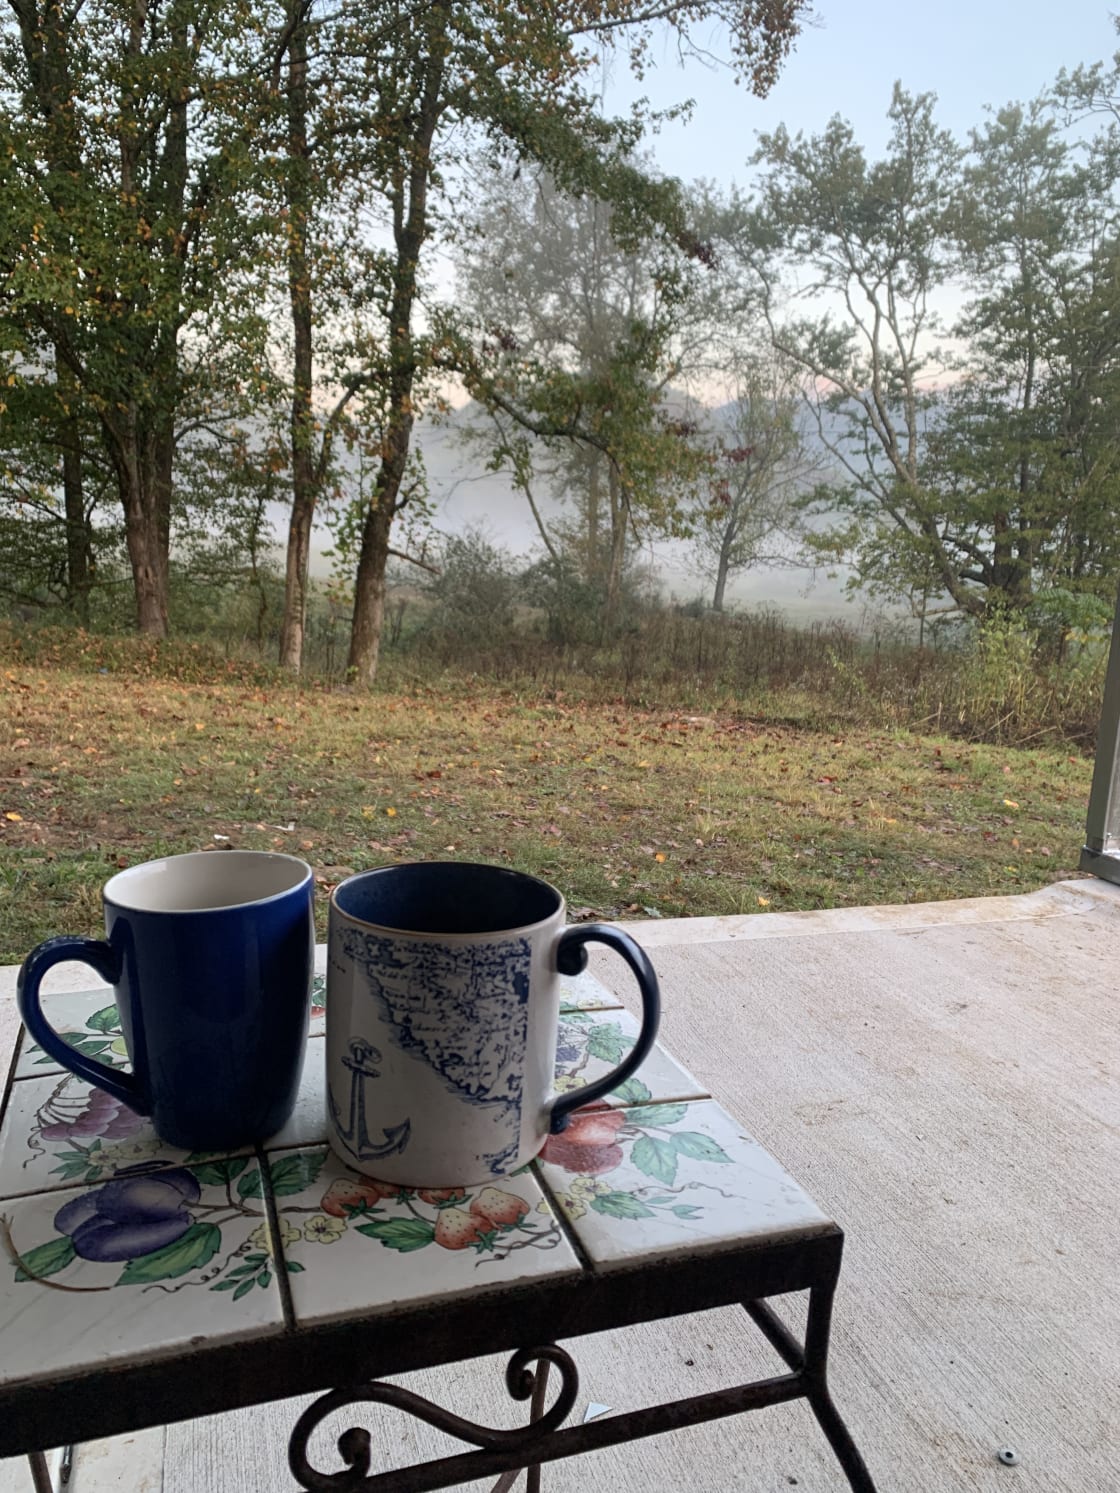 Morning coffee overlooking the smoky valley.